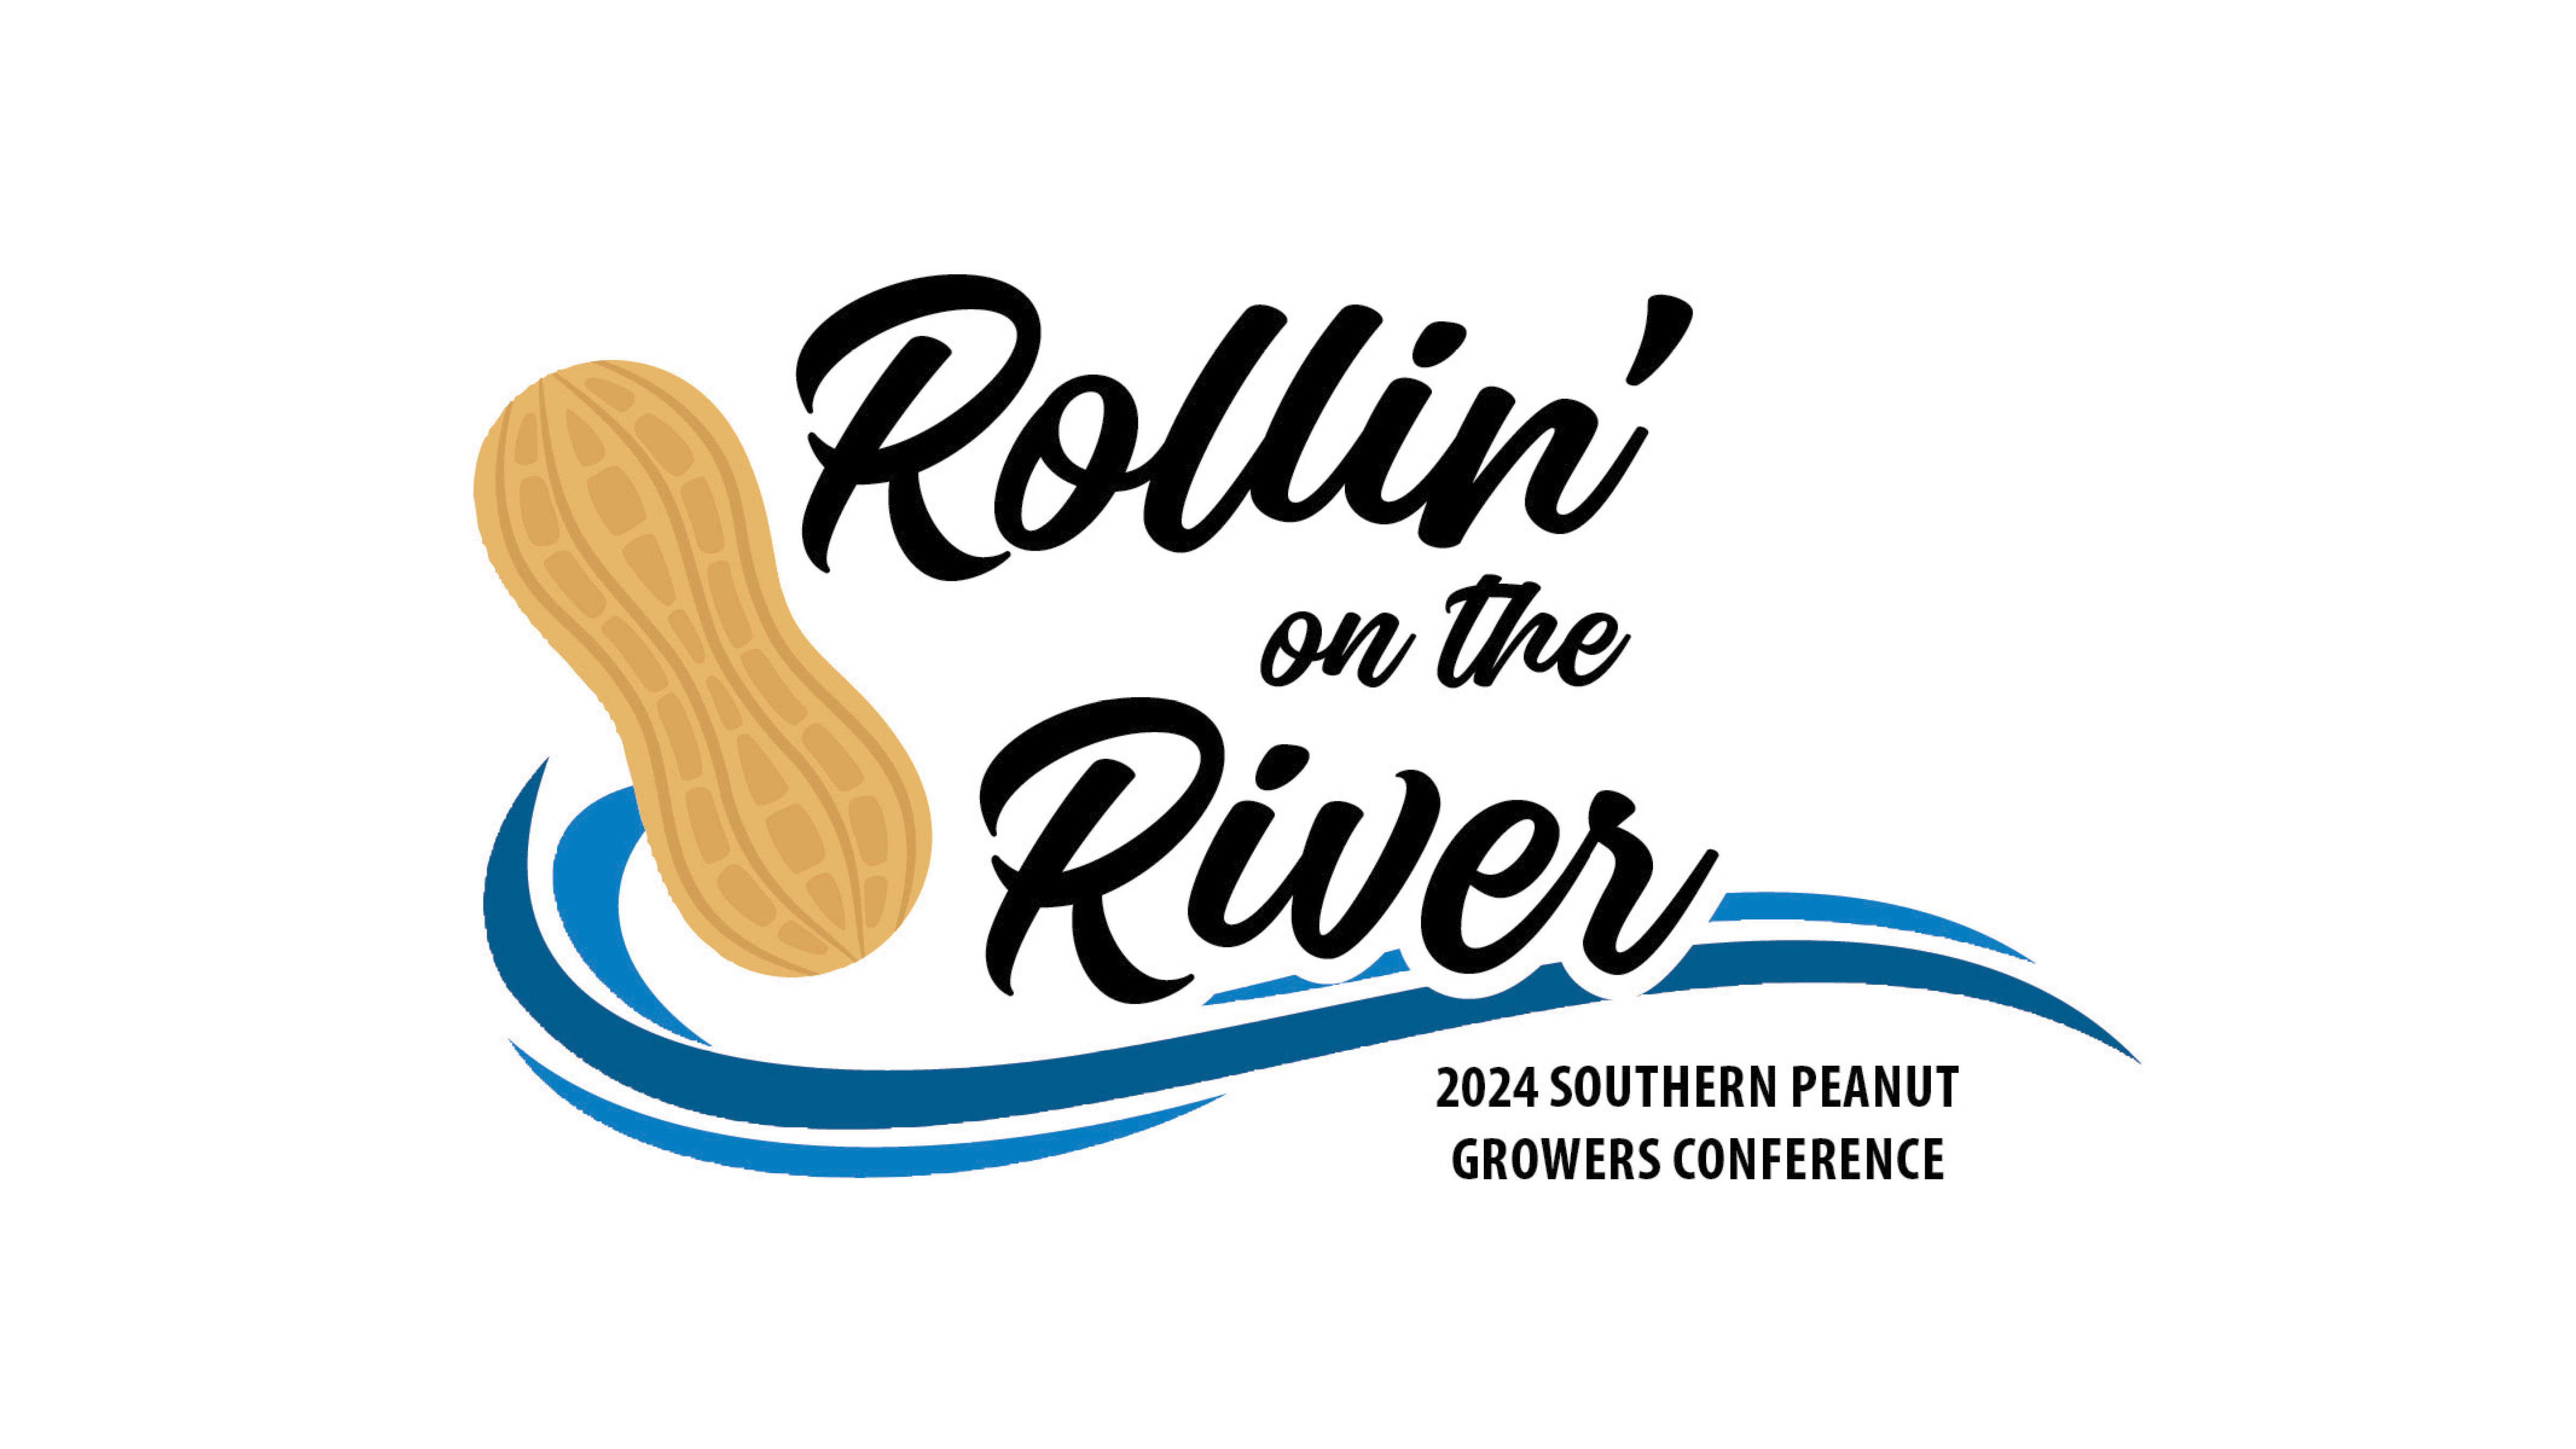 Registration Open Now! 2024 Southern Peanut Growers Conference